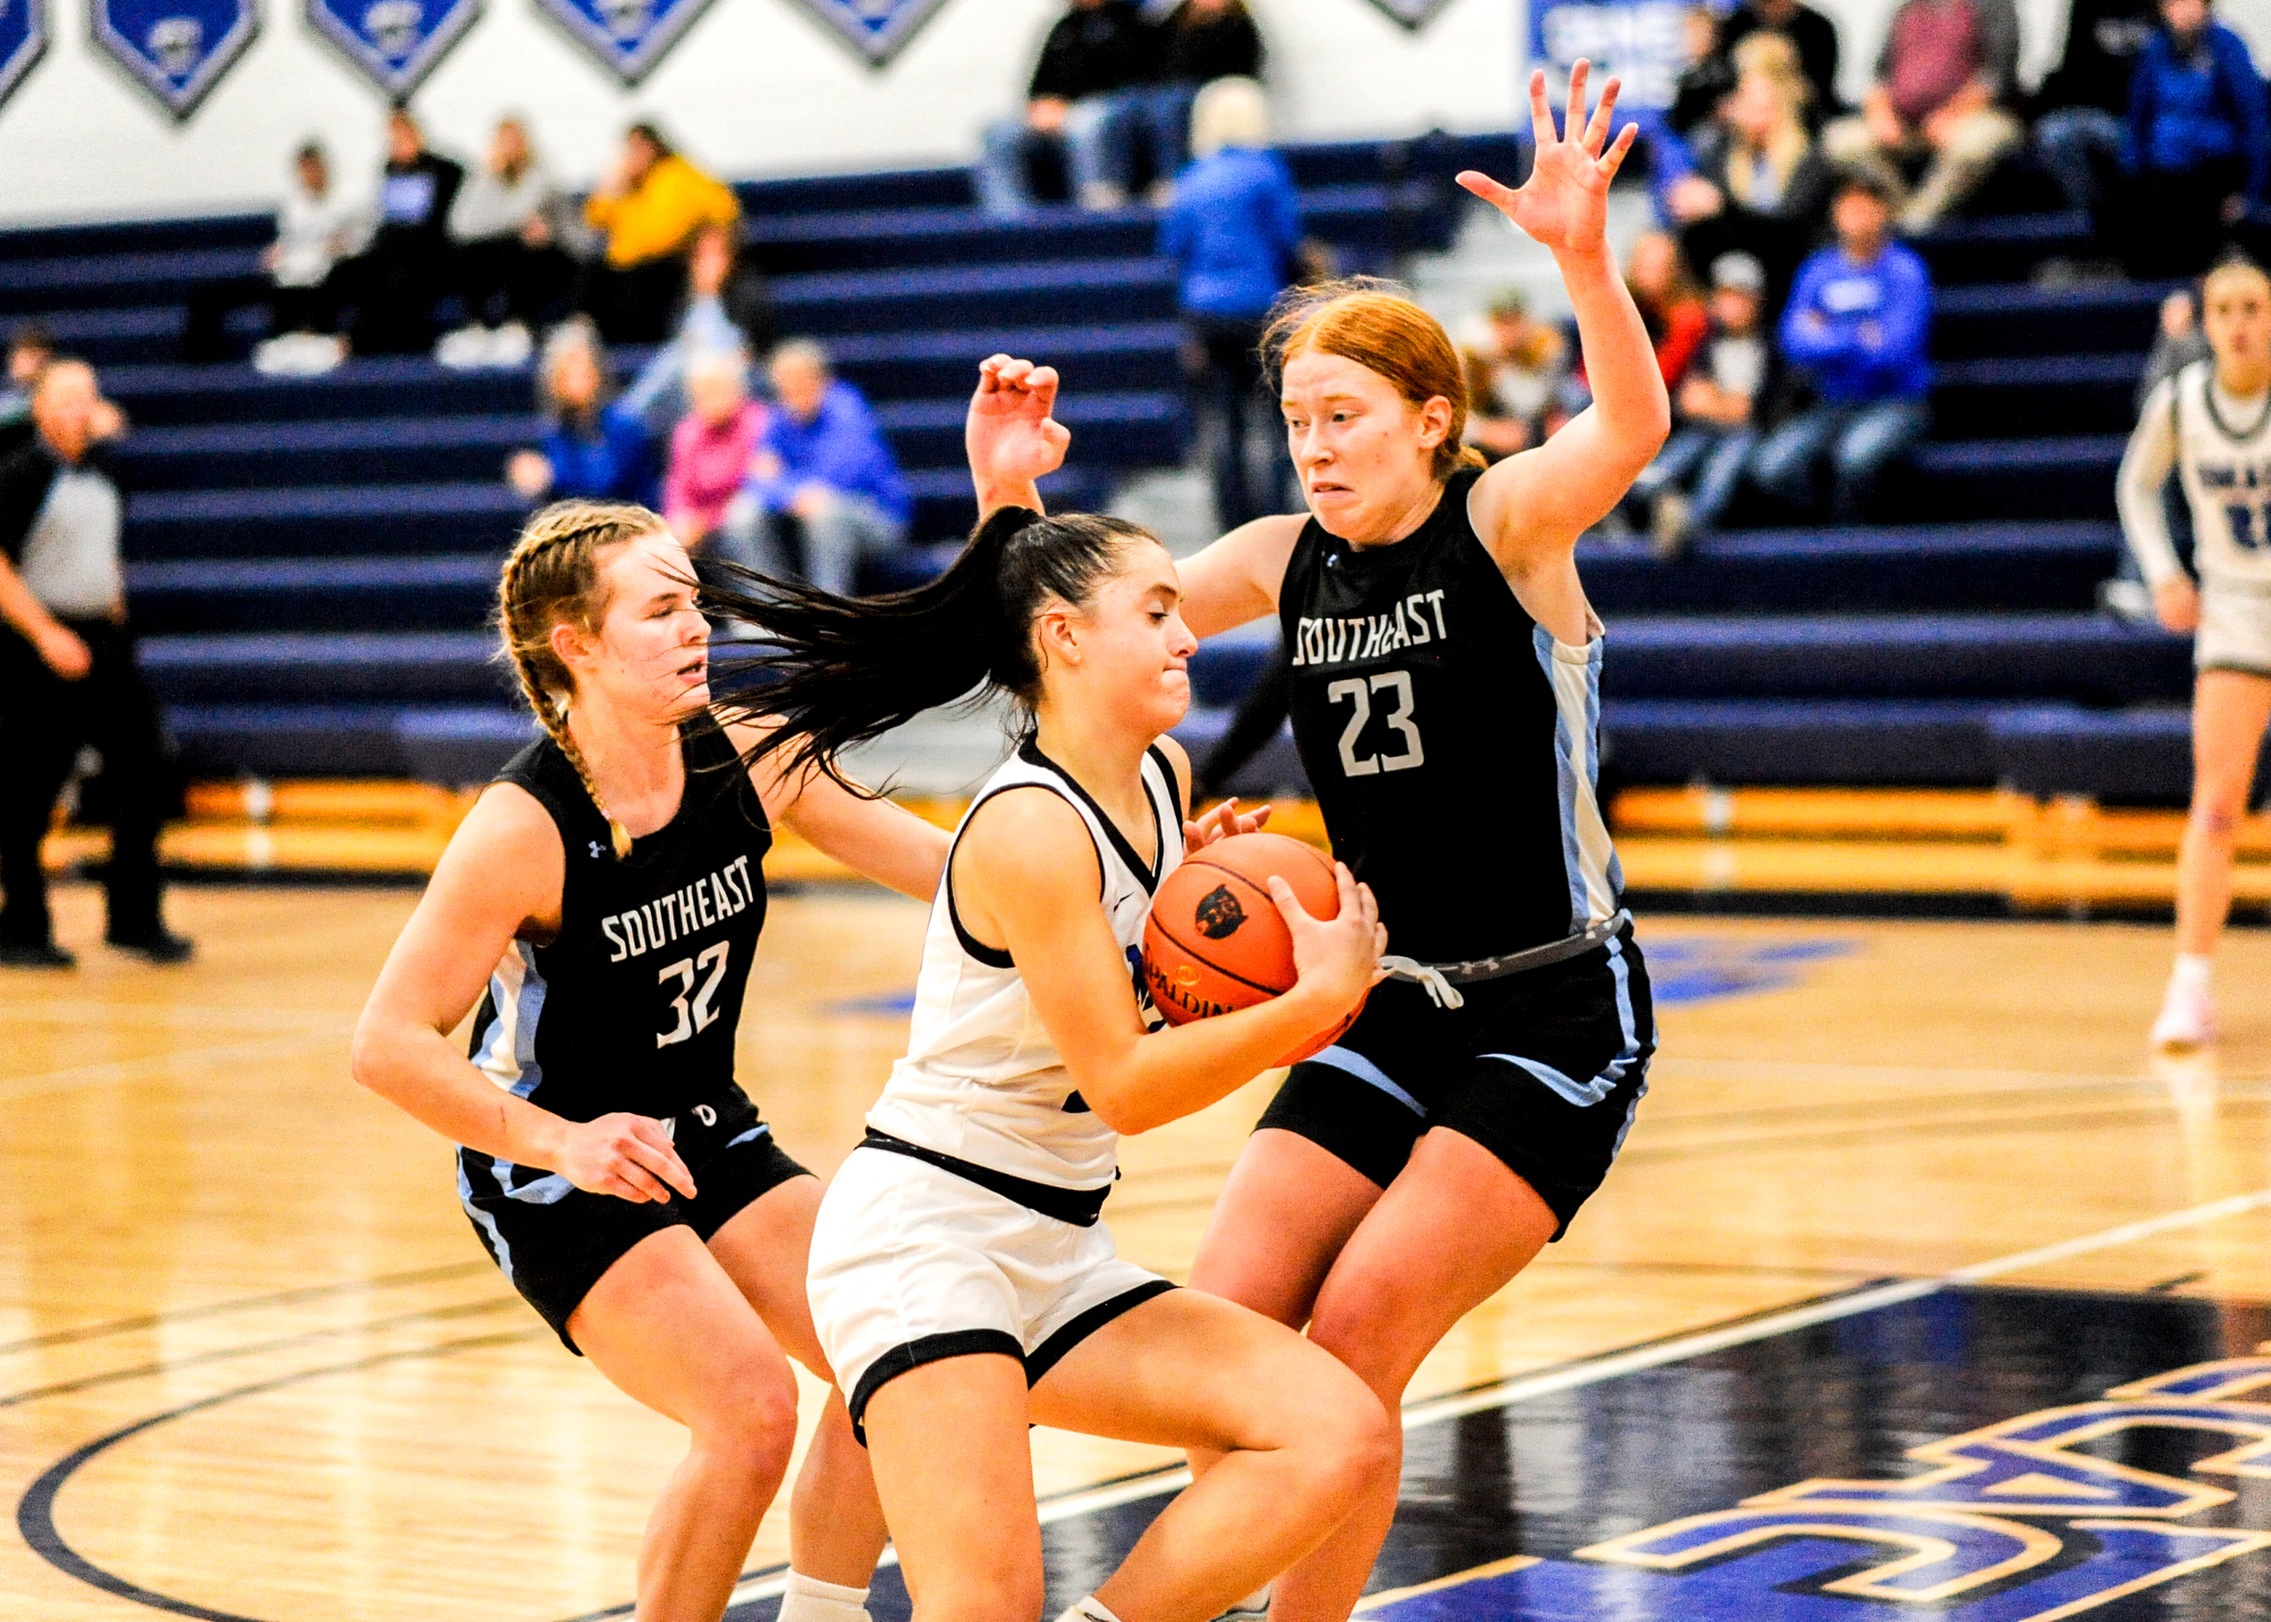 Ainley's double-double leads DMACC women's basketball team past NIACC in ICCAC opener